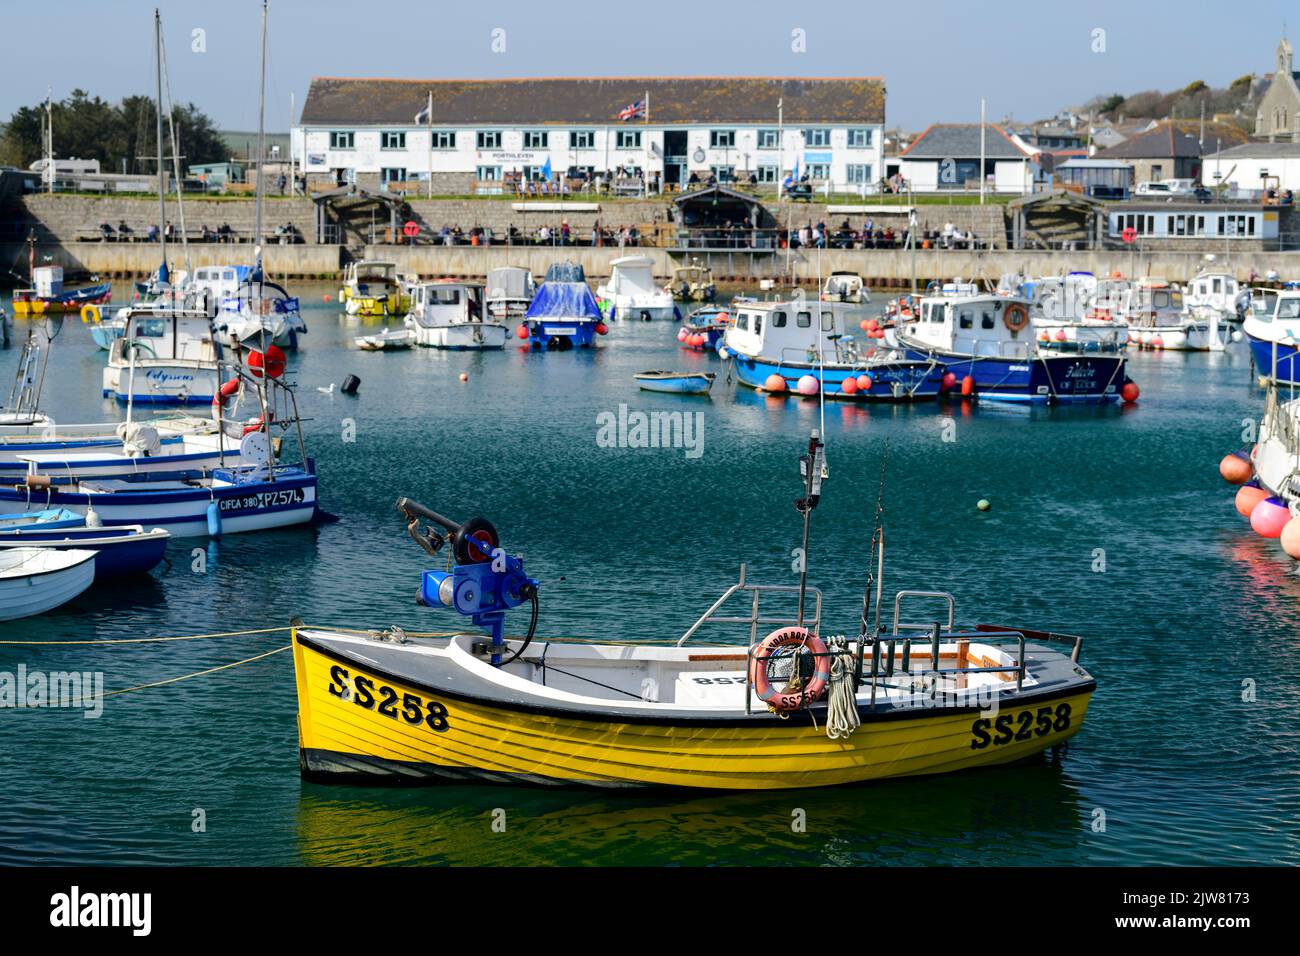 The beautiful fishing village of Porthleven. Viewing the harbour and its fishing's boats. Stock Photo